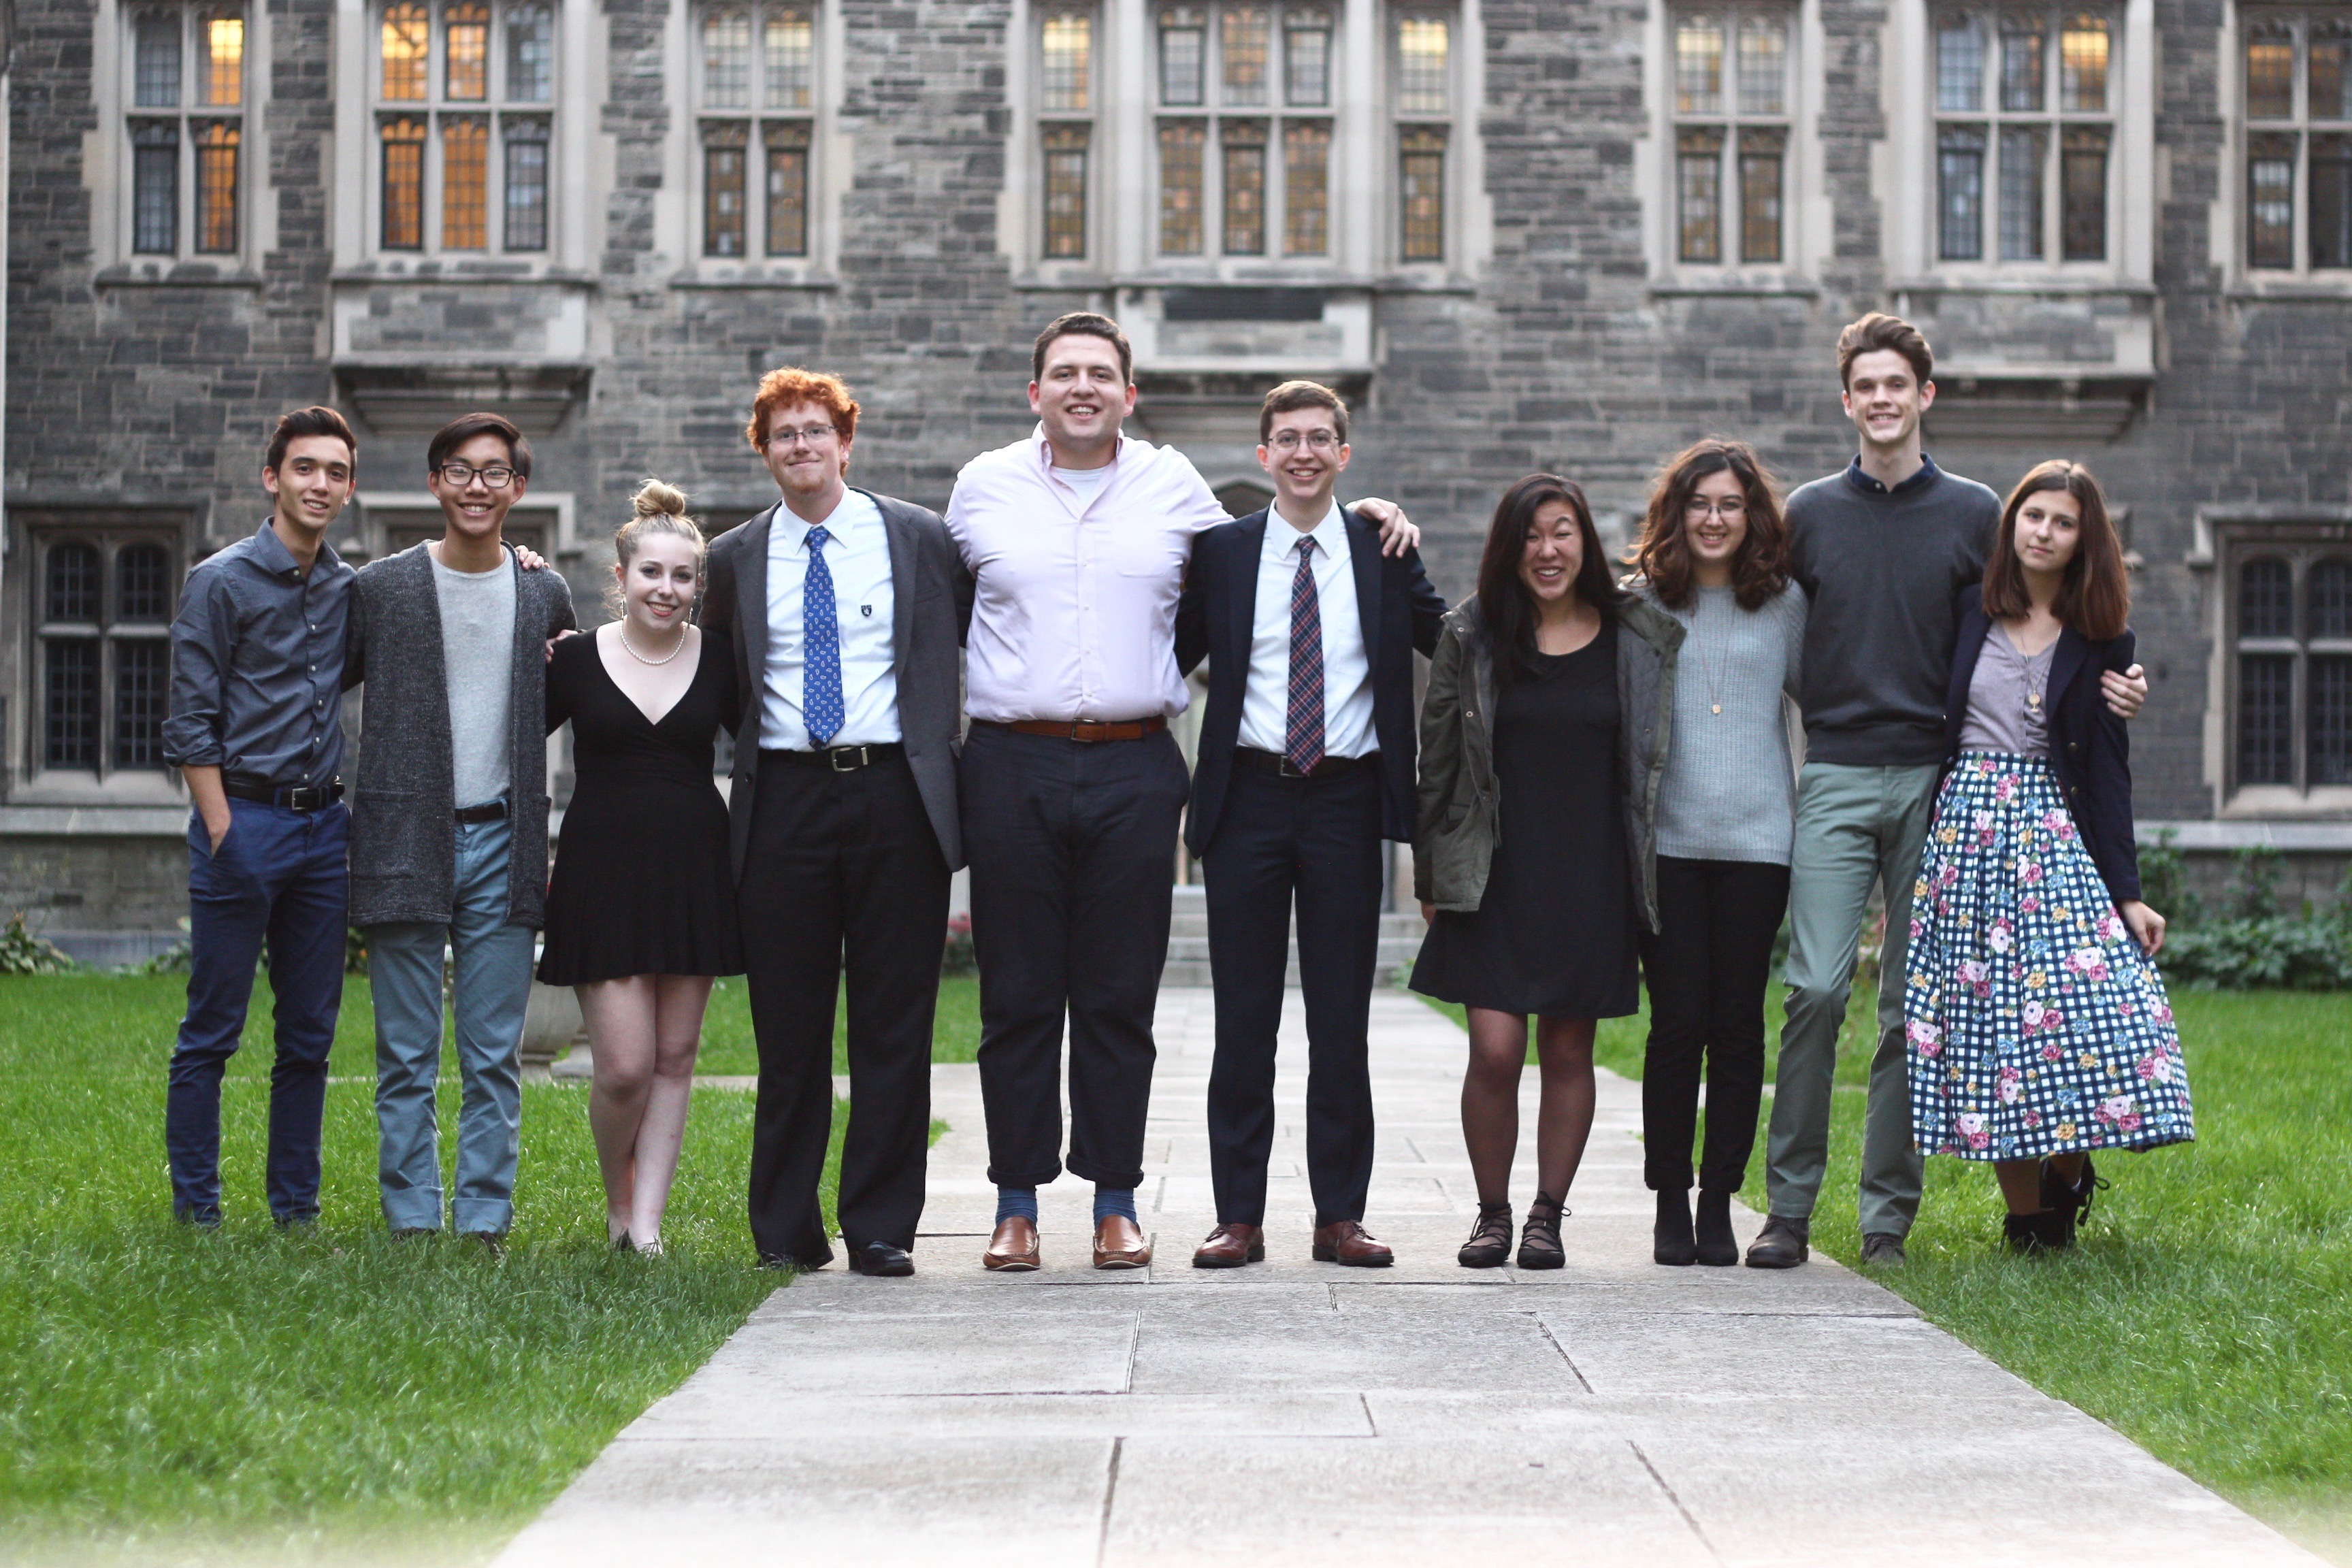 King's Debate Society group photo in Canada